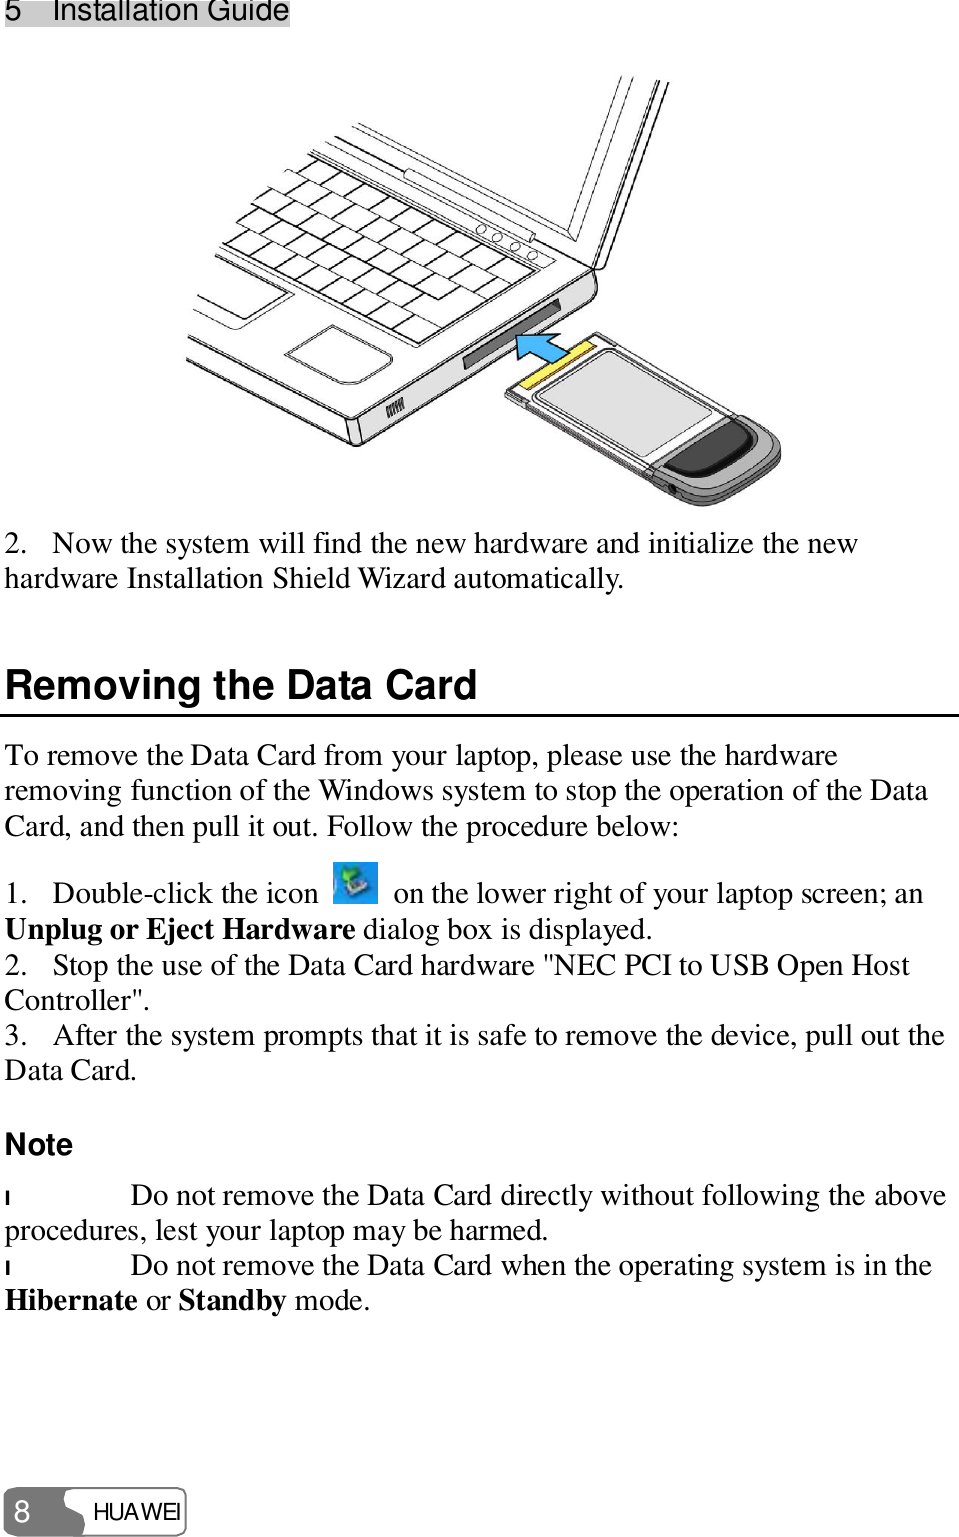 5  Installation Guide HUAWEI  8  2. Now the system will find the new hardware and initialize the new hardware Installation Shield Wizard automatically. Removing the Data Card To remove the Data Card from your laptop, please use the hardware removing function of the Windows system to stop the operation of the Data Card, and then pull it out. Follow the procedure below: 1. Double-click the icon   on the lower right of your laptop screen; an Unplug or Eject Hardware dialog box is displayed. 2. Stop the use of the Data Card hardware &quot;NEC PCI to USB Open Host Controller&quot;. 3. After the system prompts that it is safe to remove the device, pull out the Data Card. Note  l Do not remove the Data Card directly without following the above procedures, lest your laptop may be harmed. l Do not remove the Data Card when the operating system is in the Hibernate or Standby mode.  